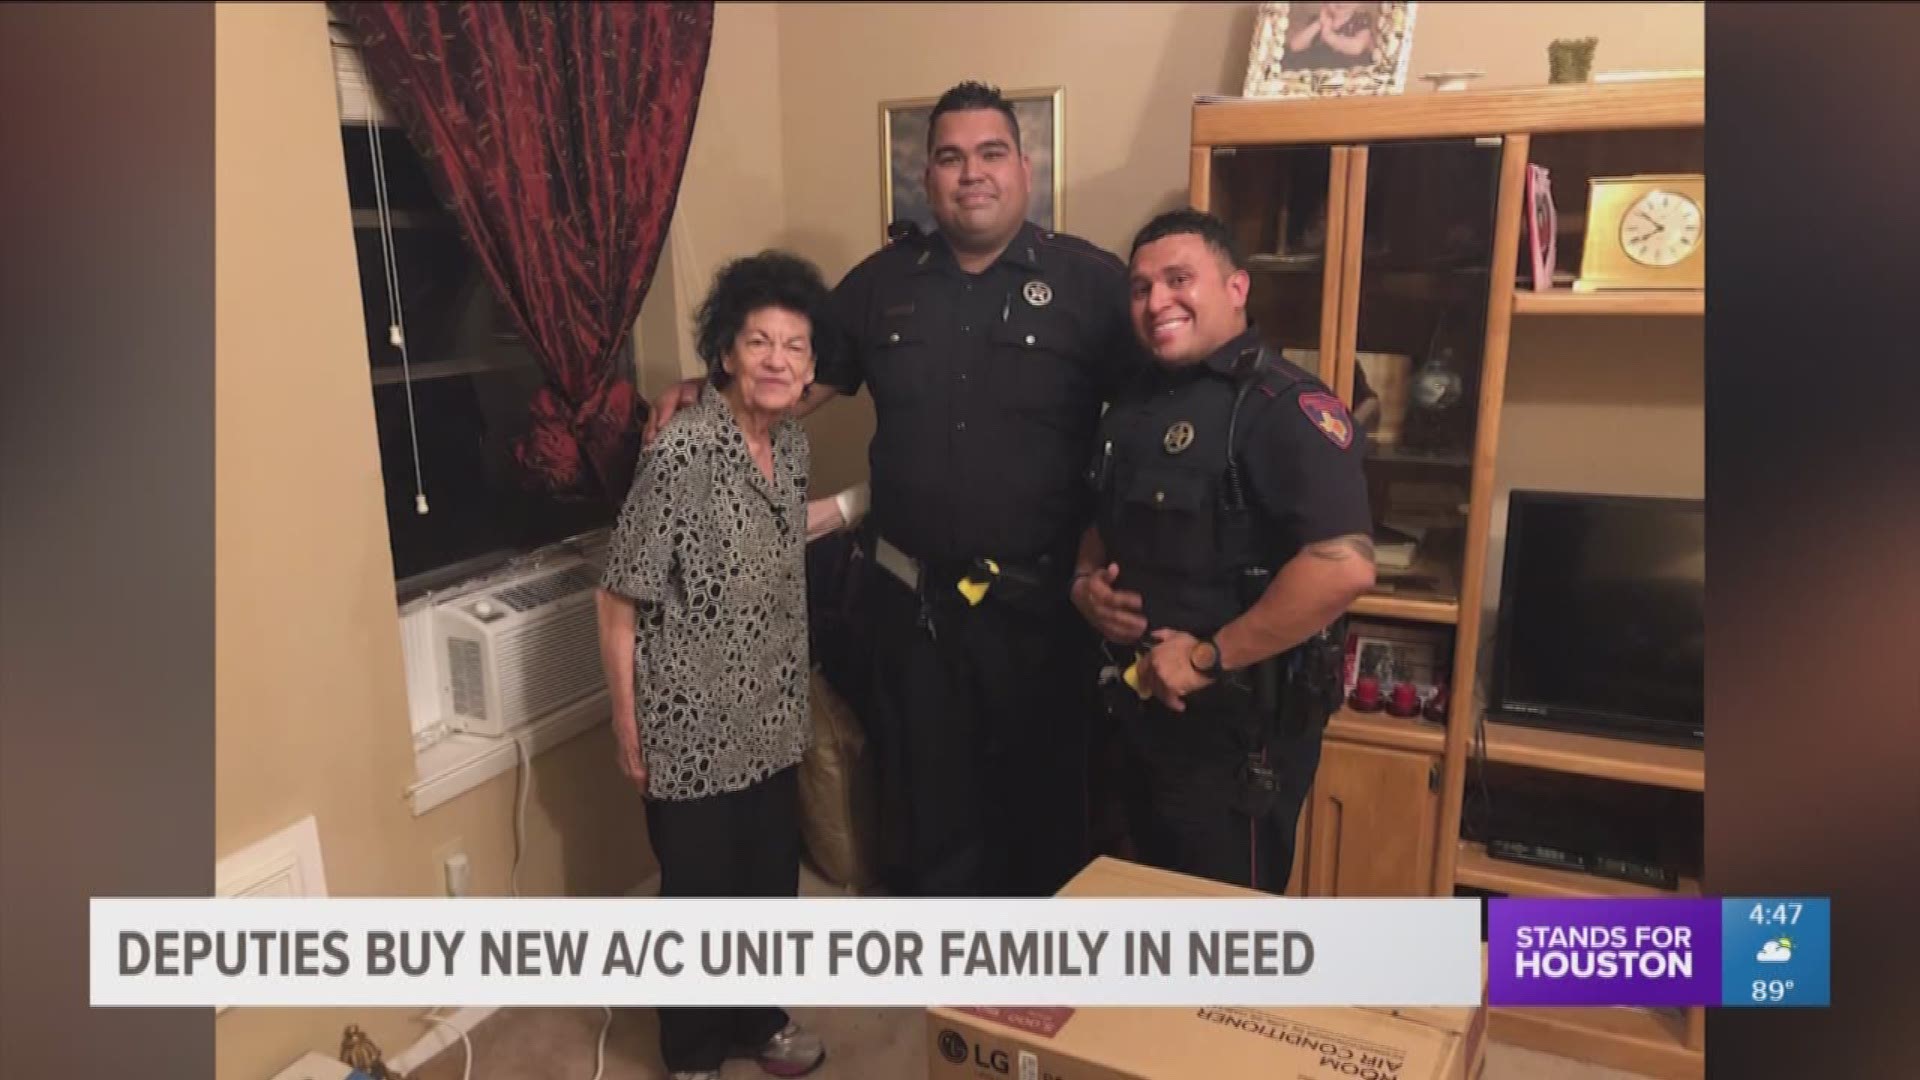 Some local deputies helped an elderly family struggling in the heat by purchasing a new A/C for them.